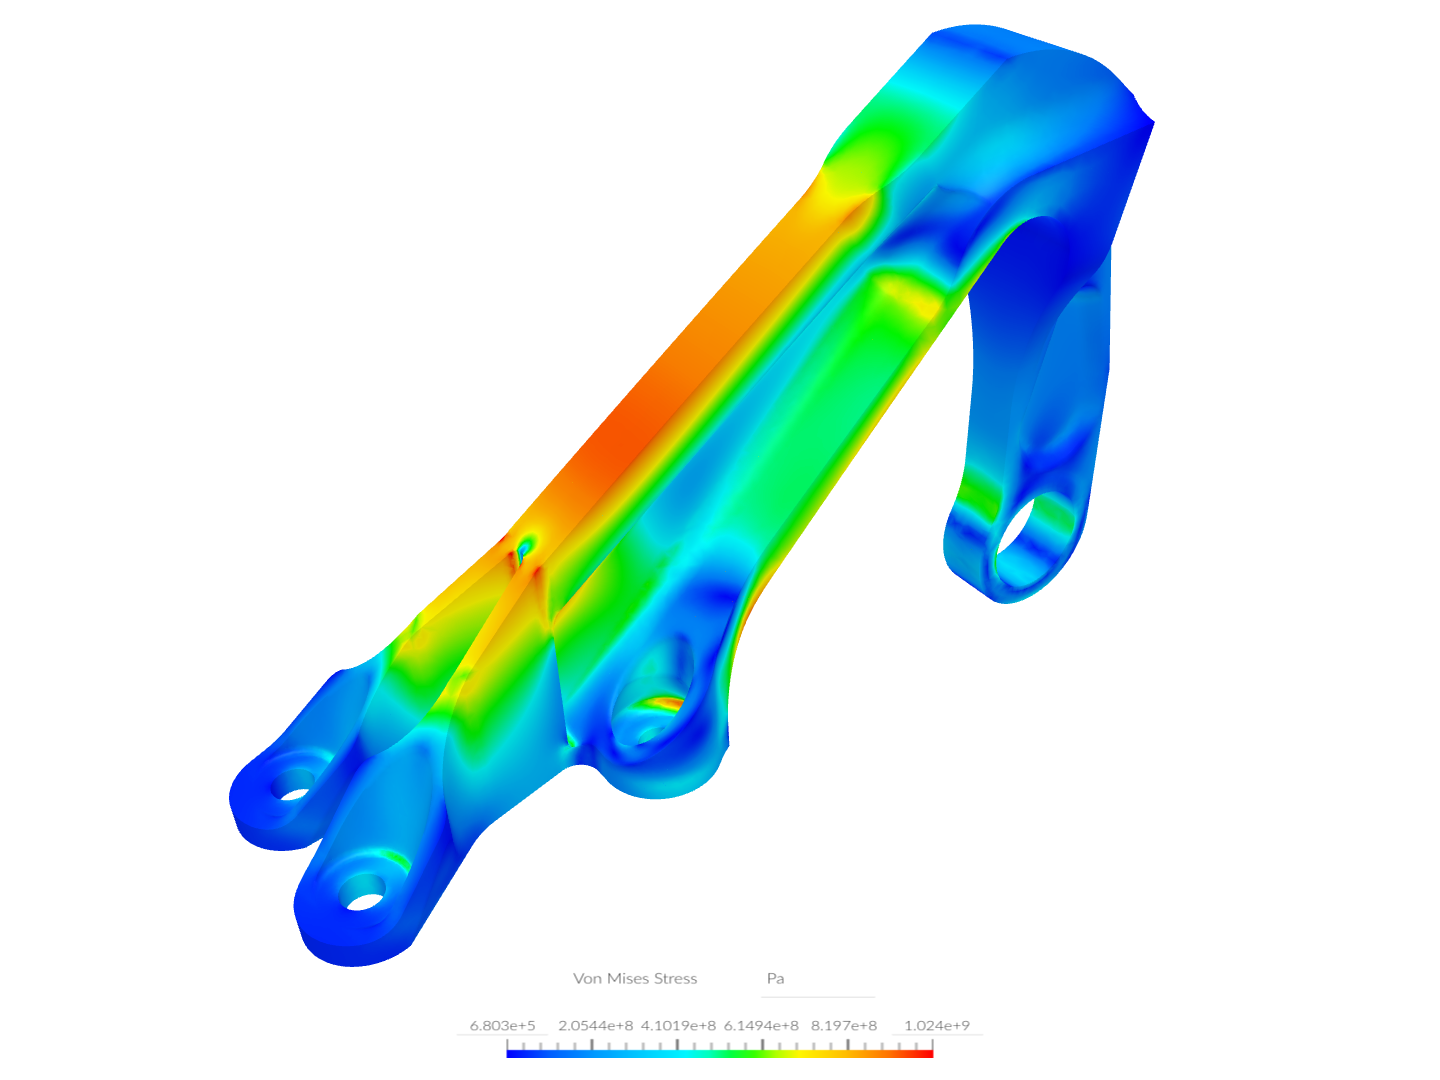 Linear & Non-Linear FEM Analysis of Aircraft Engine Bearing Bracket using Simscale (Coursera) image